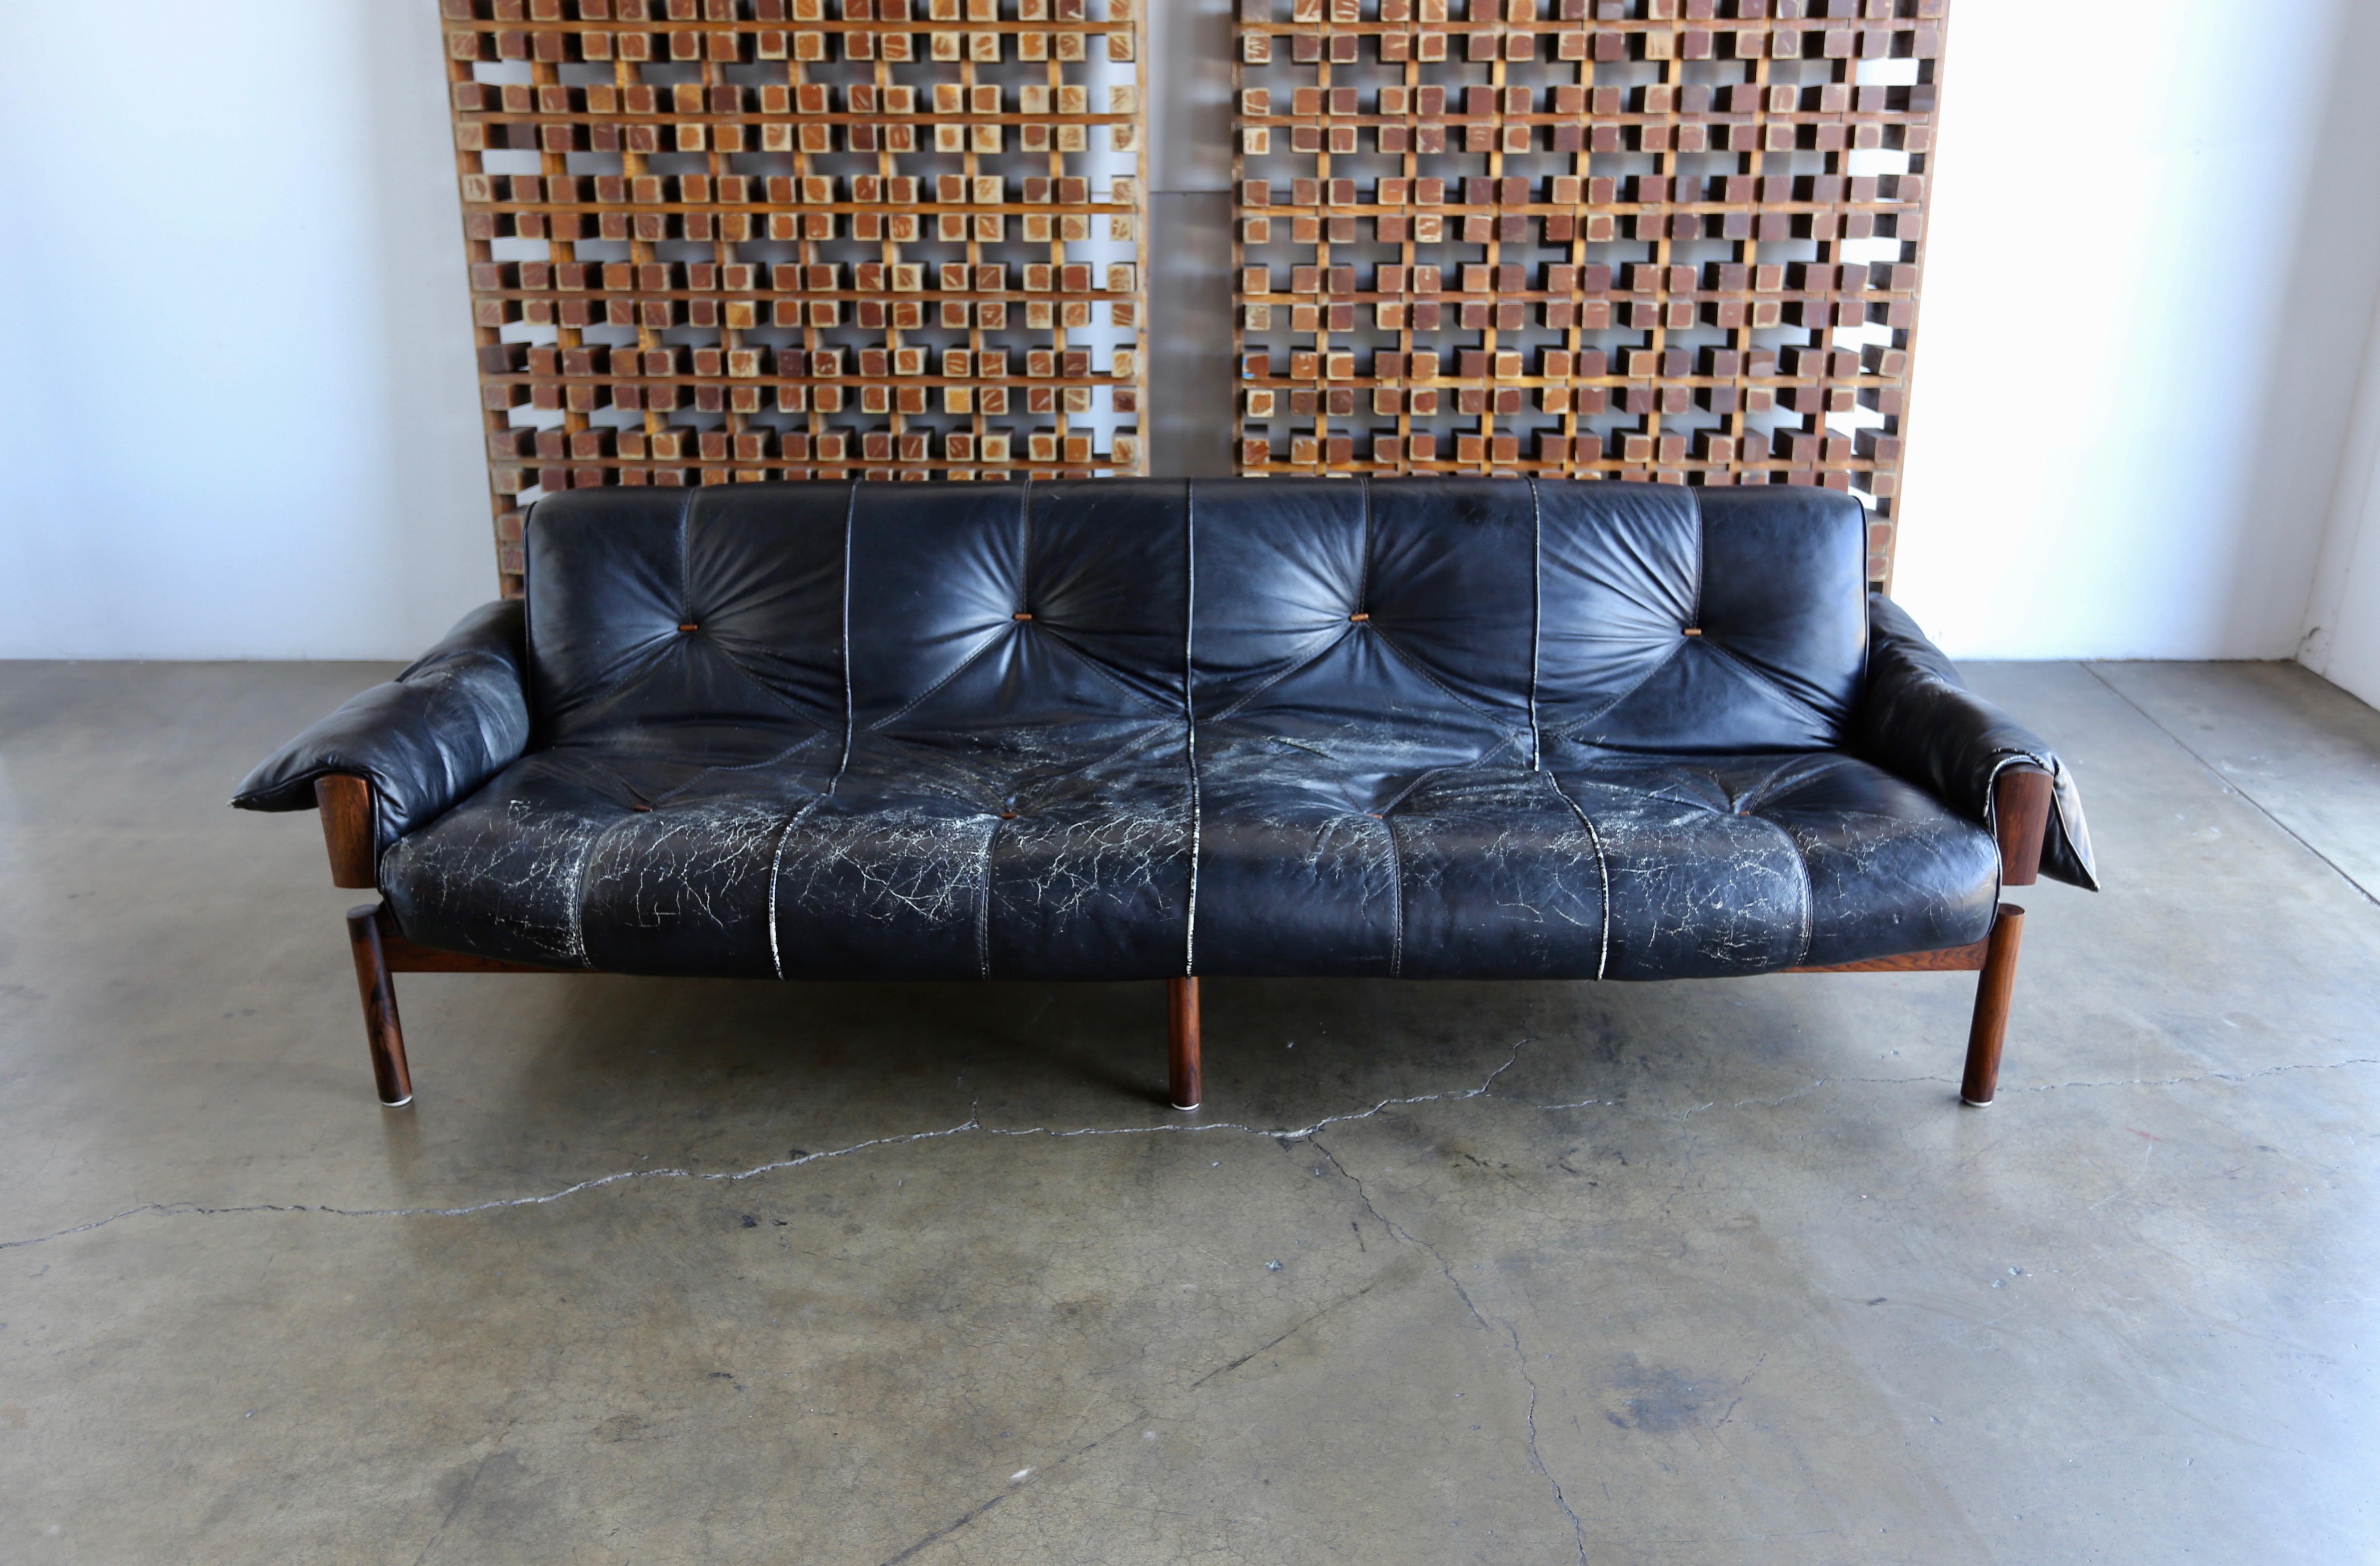 Brazilian rosewood and leather sofa by Percival Lafer, Brazil, circa 1970. Highly figured rosewood frame with beautifully distressed original black leather.

The listed measurements are to the outside of each arm cushion.